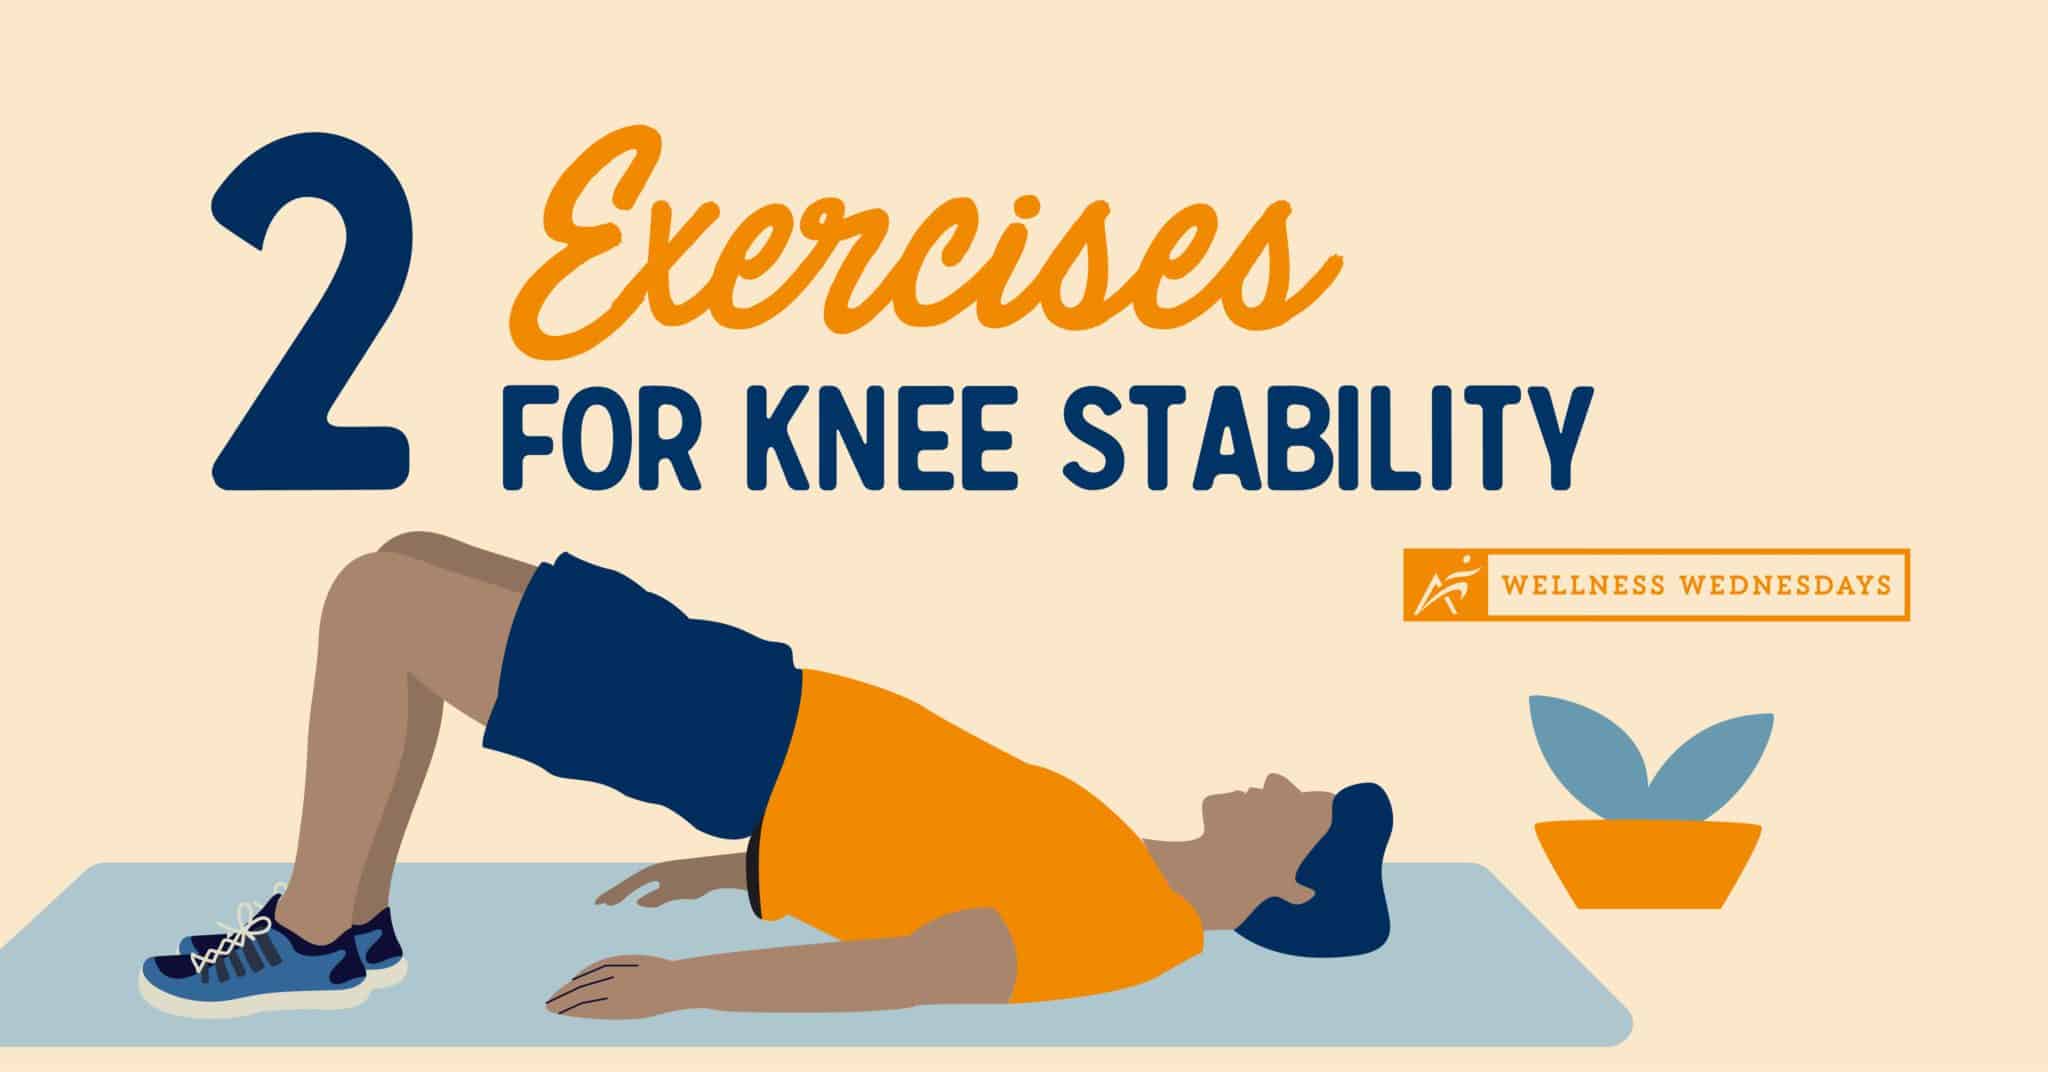 Exercises for Knee Stability, Strong Joints